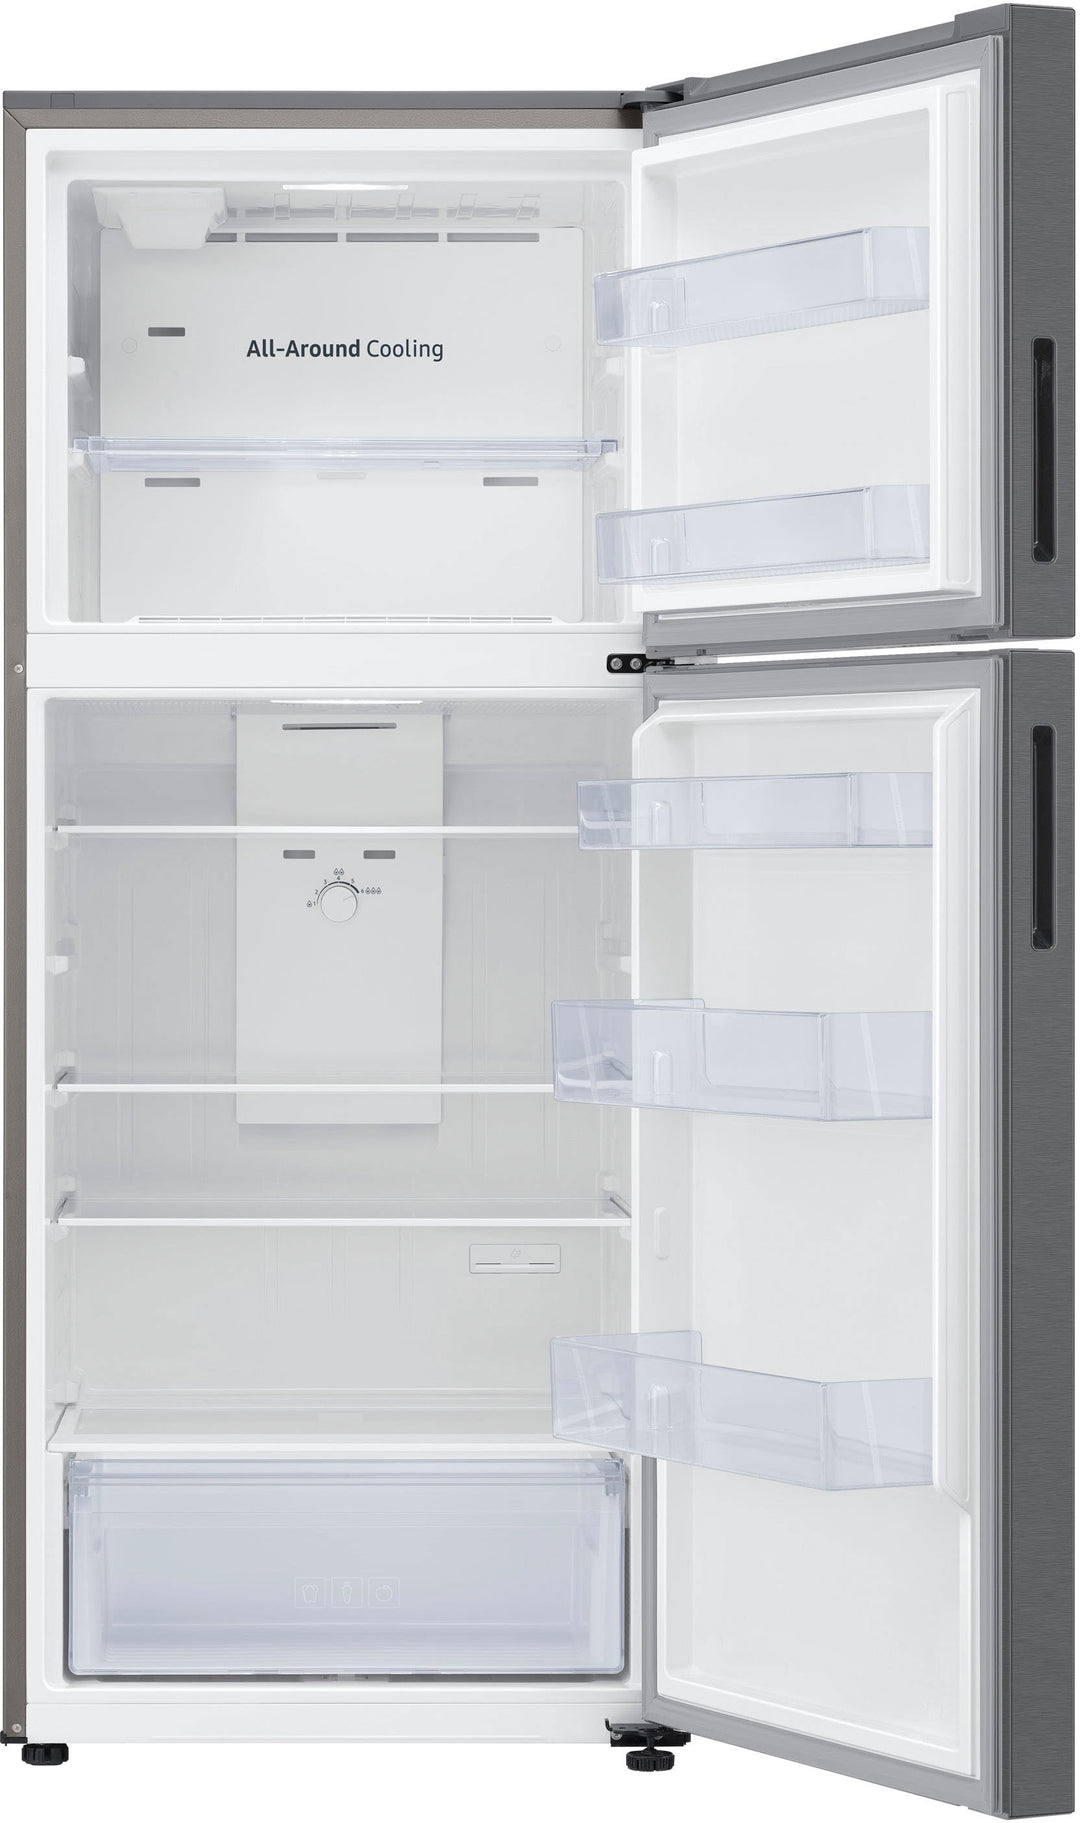 Samsung - 15.6 cu. ft. Top Freezer Refrigerator with All-Around Cooling - Stainless steel_4